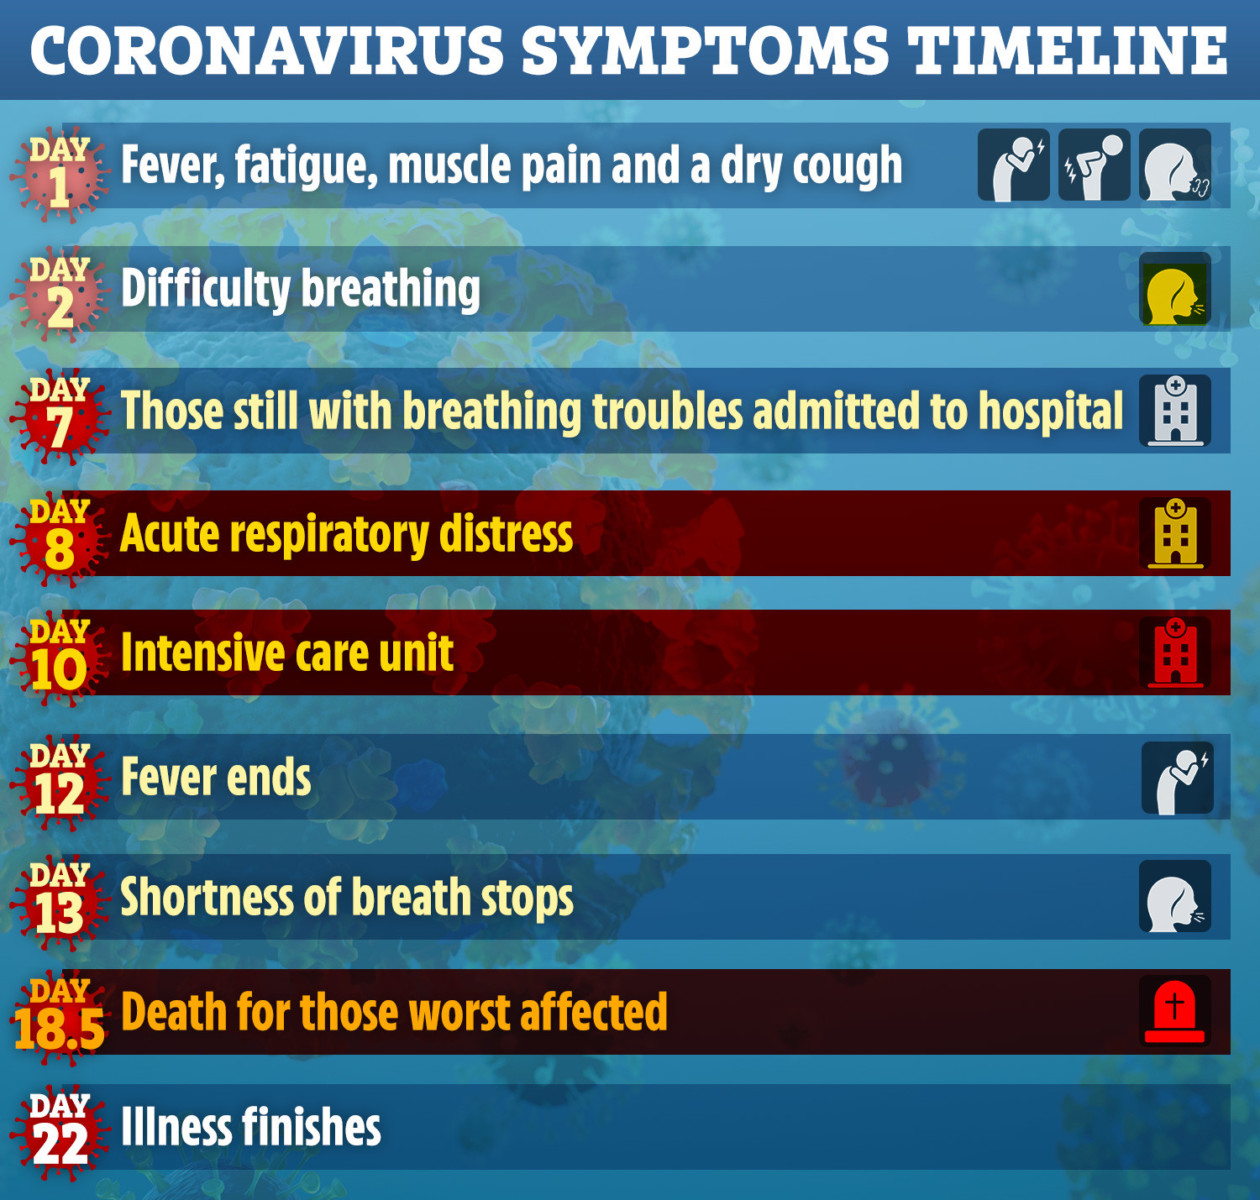 Scientists have produced a day-by-day breakdown of the typical Covid-19 symptoms